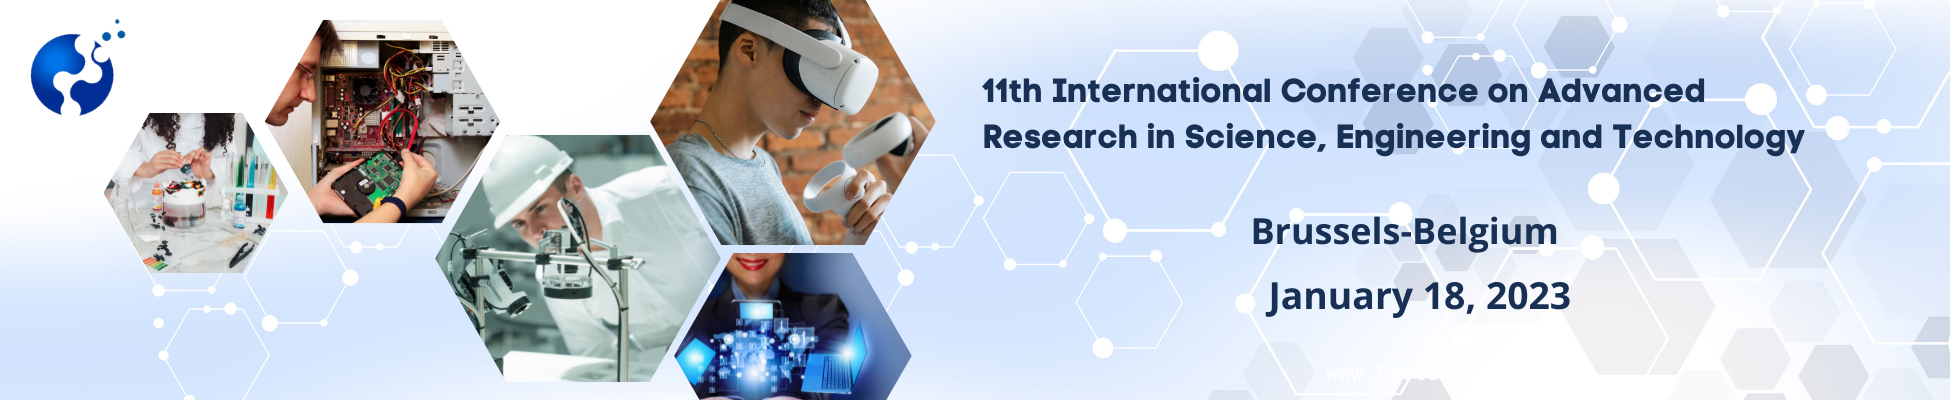 11th International Conference on Advanced Research in Science, Engineering and Technology